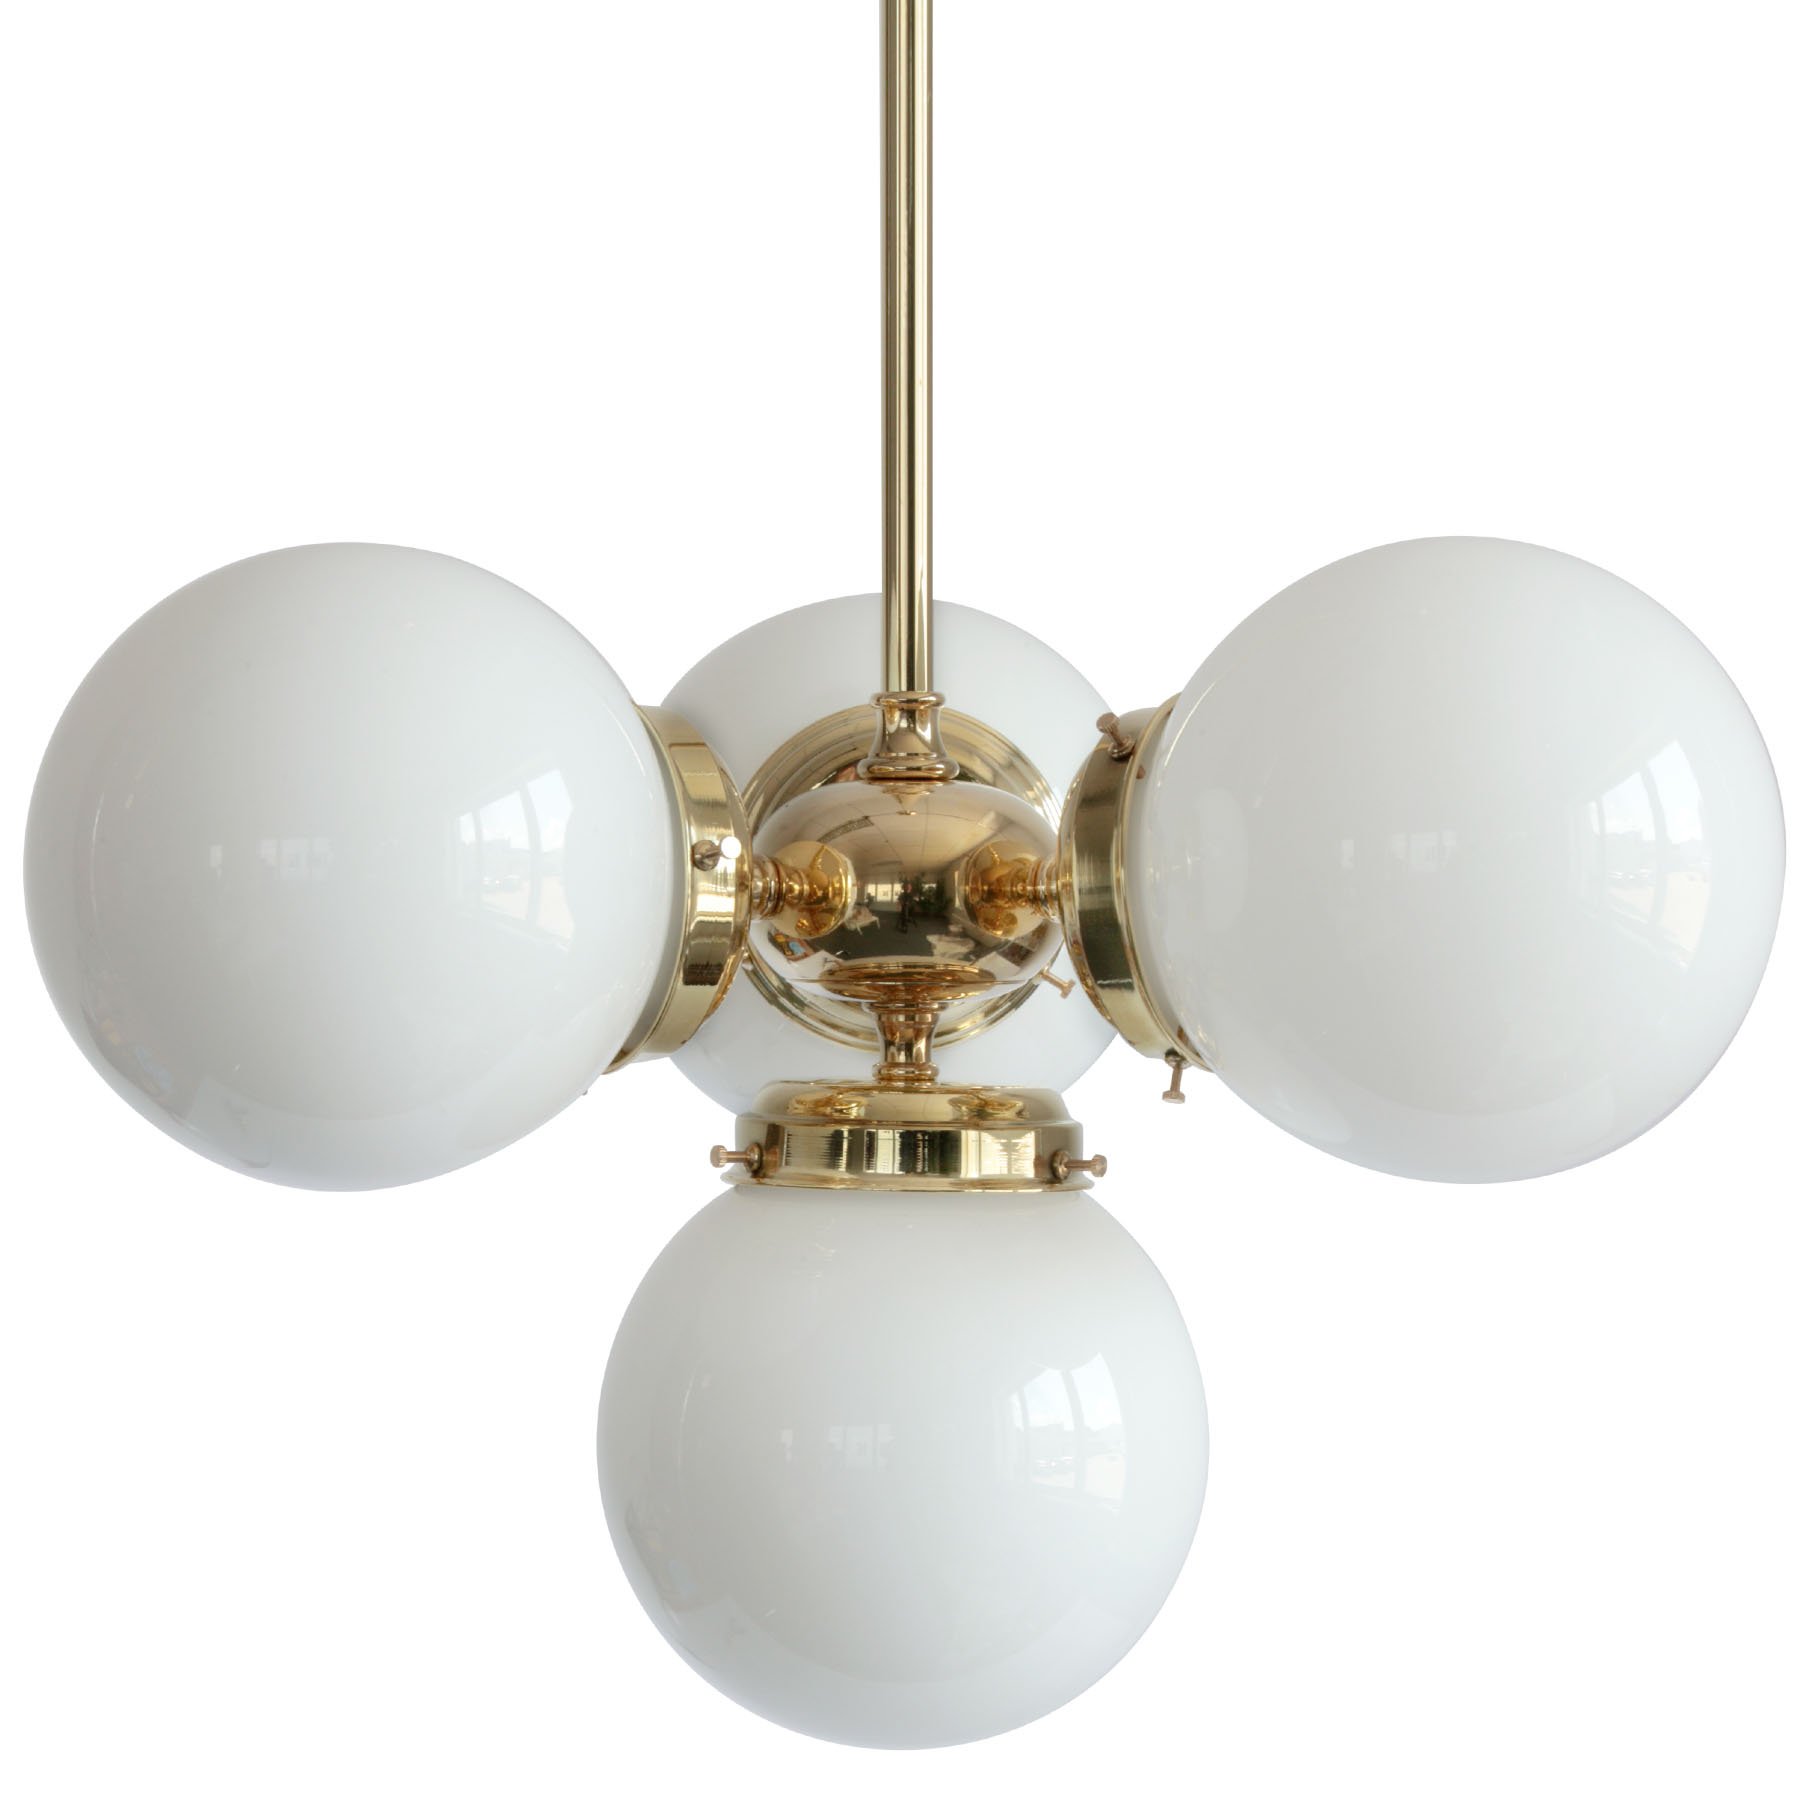 Chandelier With Four Small Glass Globes Made of White Opal Glass: Messing lackiert und poliert